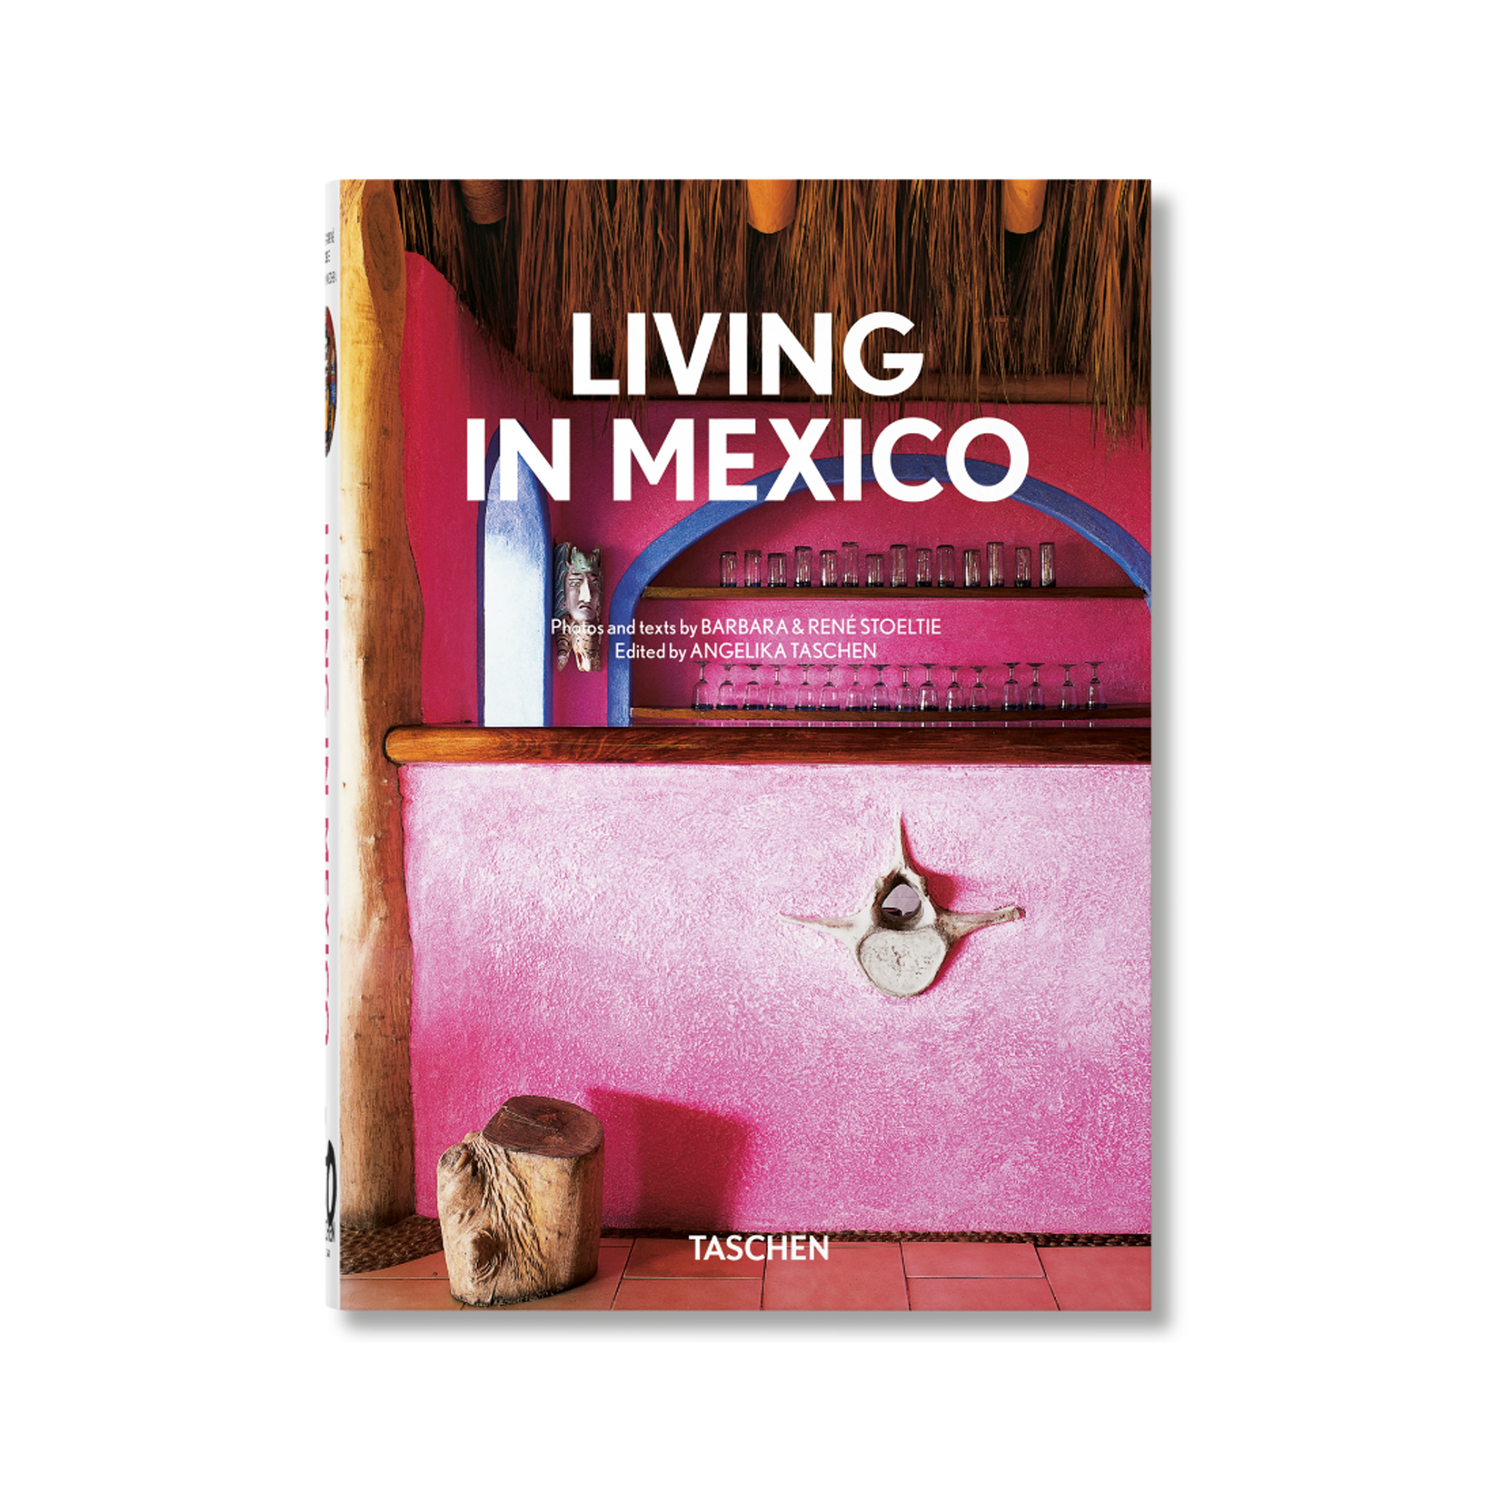 Living in Mexico book